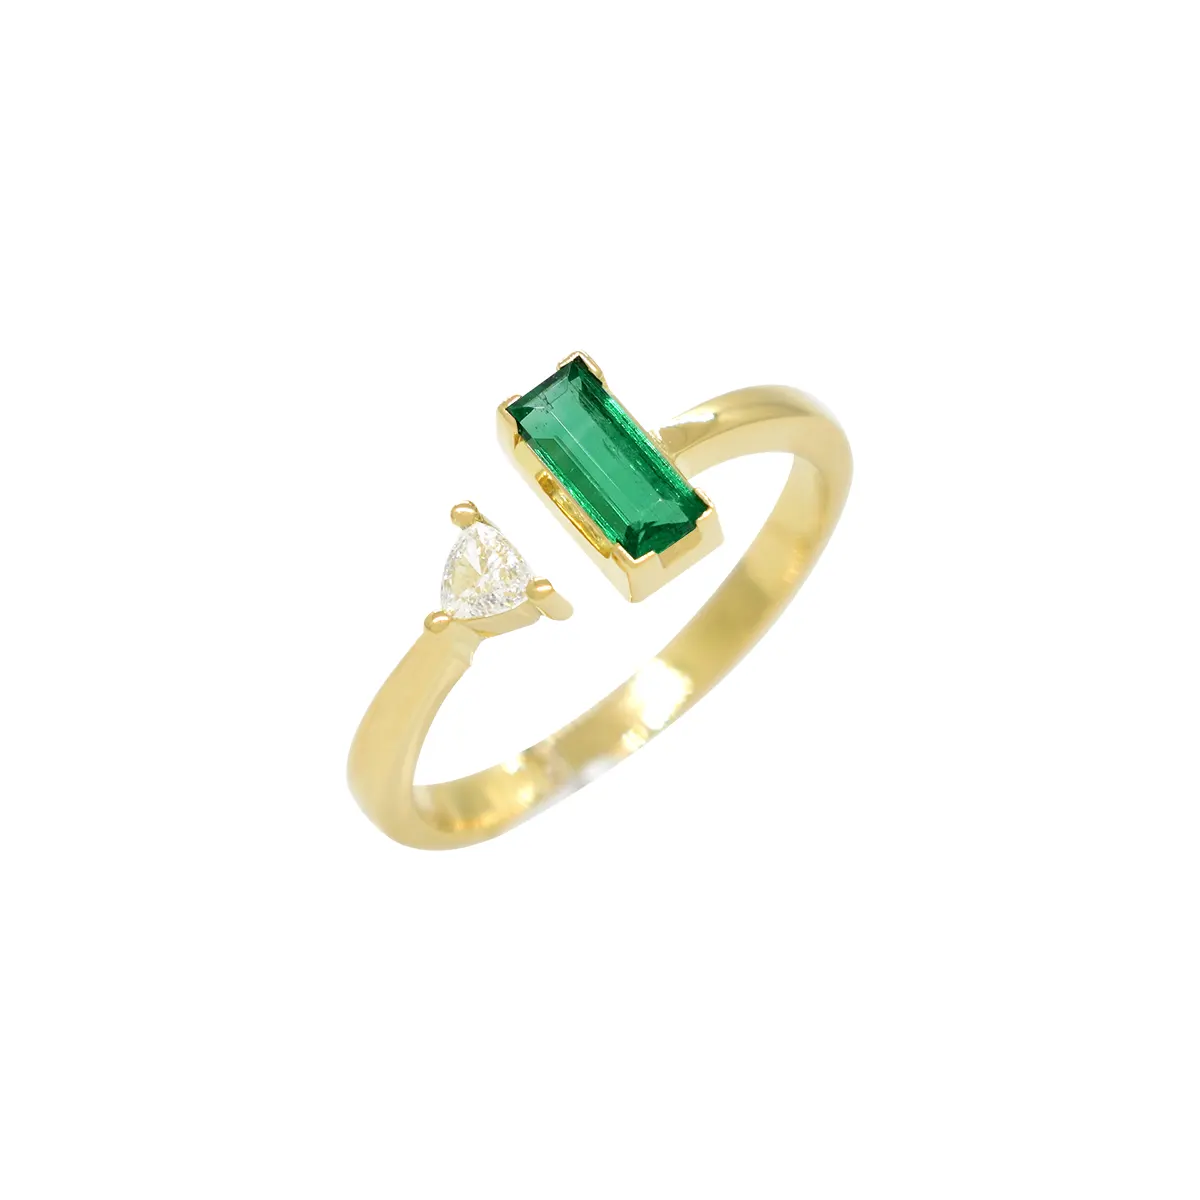 Emerald and diamond open cuff ring with 0.34 Ct. emerald cut natural Colombian emerald with deep and clear green color set with 0.08 trillion cut genuine diamond